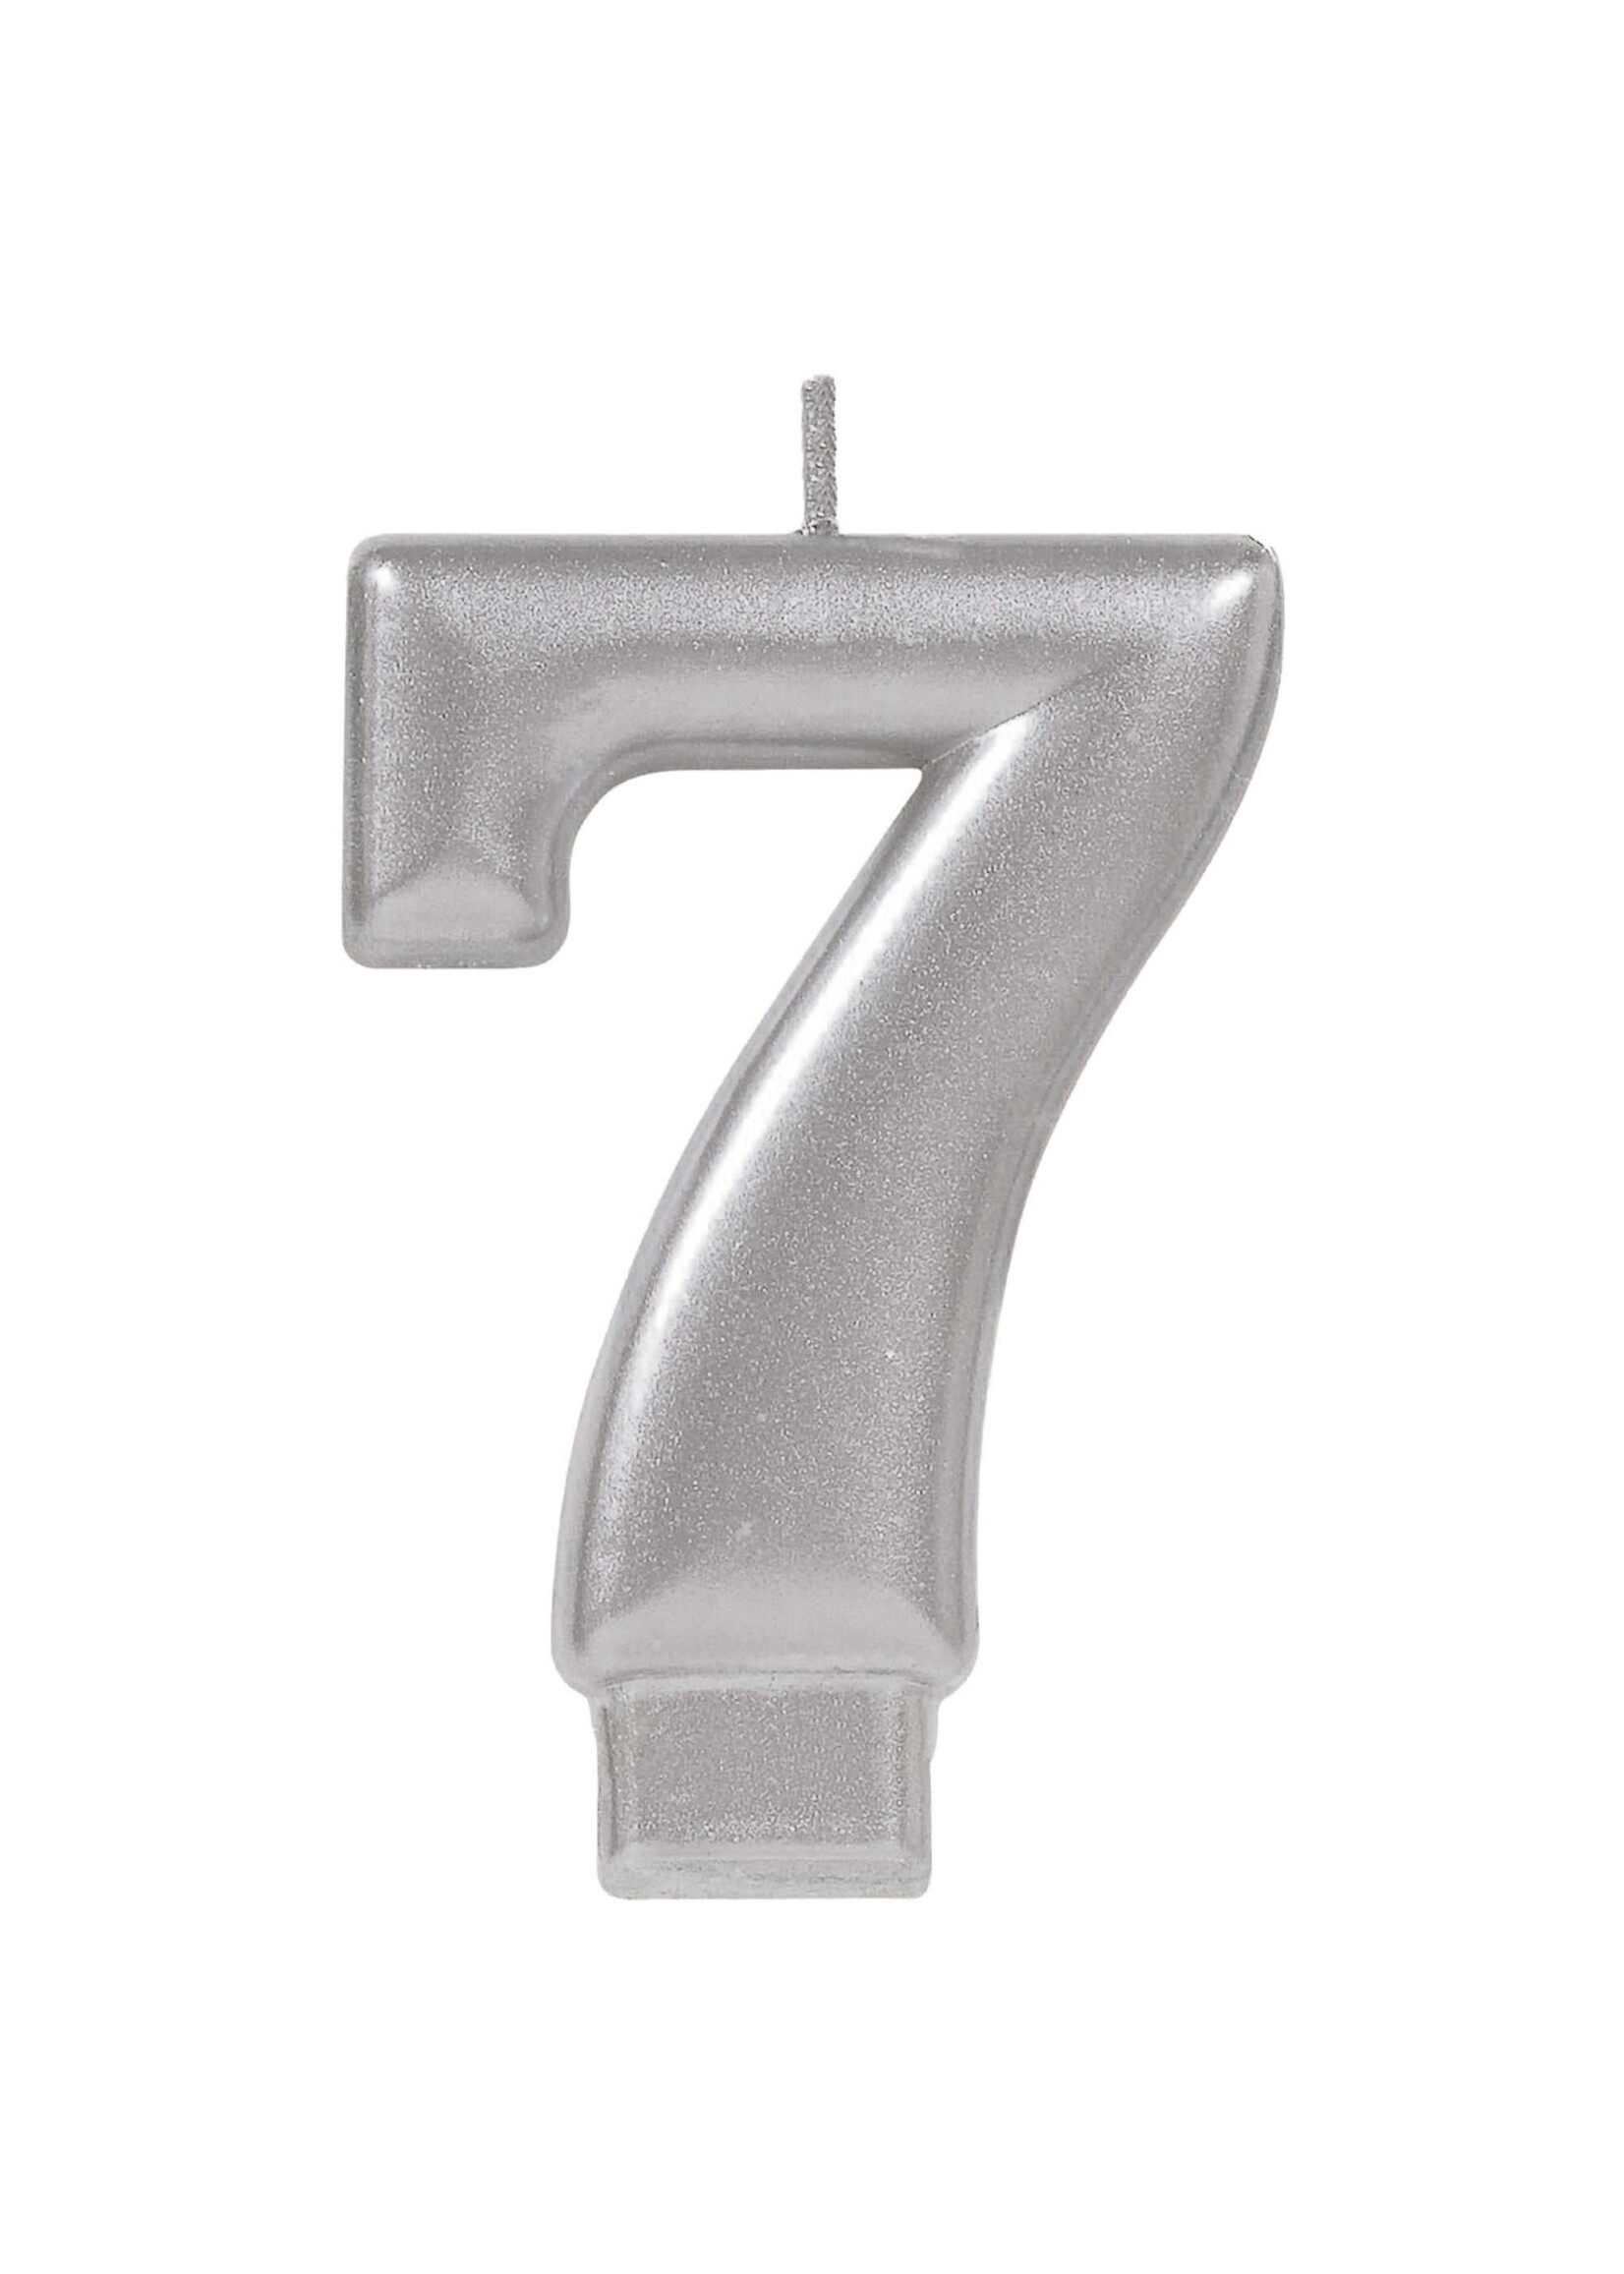 Numeral Metallic Candle #7 - Silver